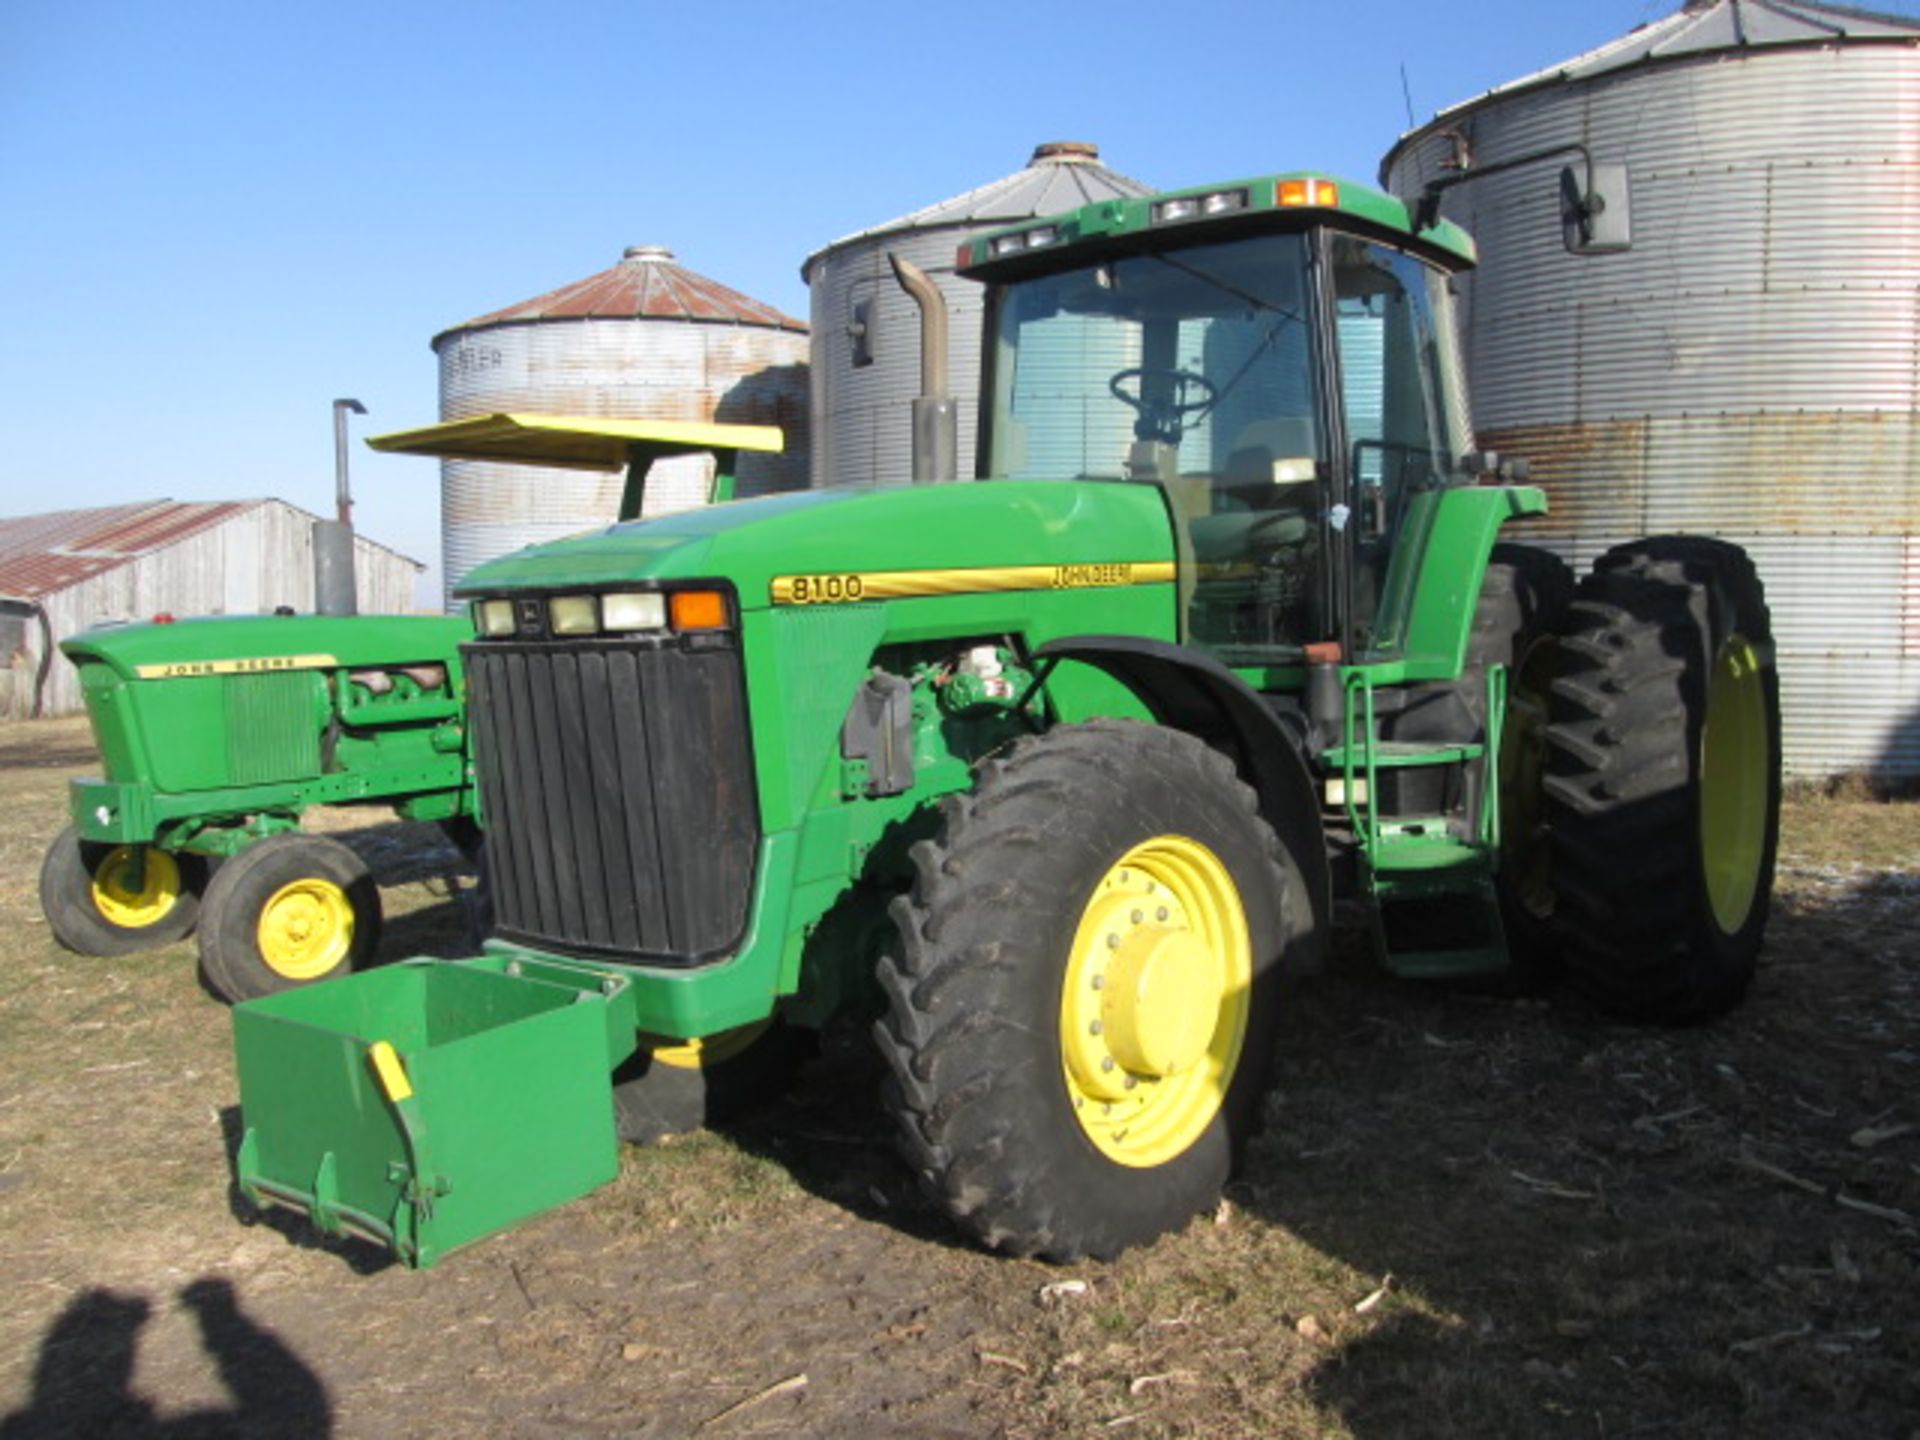 1995 JD 8100MFWD,SN RW8100P003513,18.4X42 DUALS,3 HYDR, 3235 HRS.